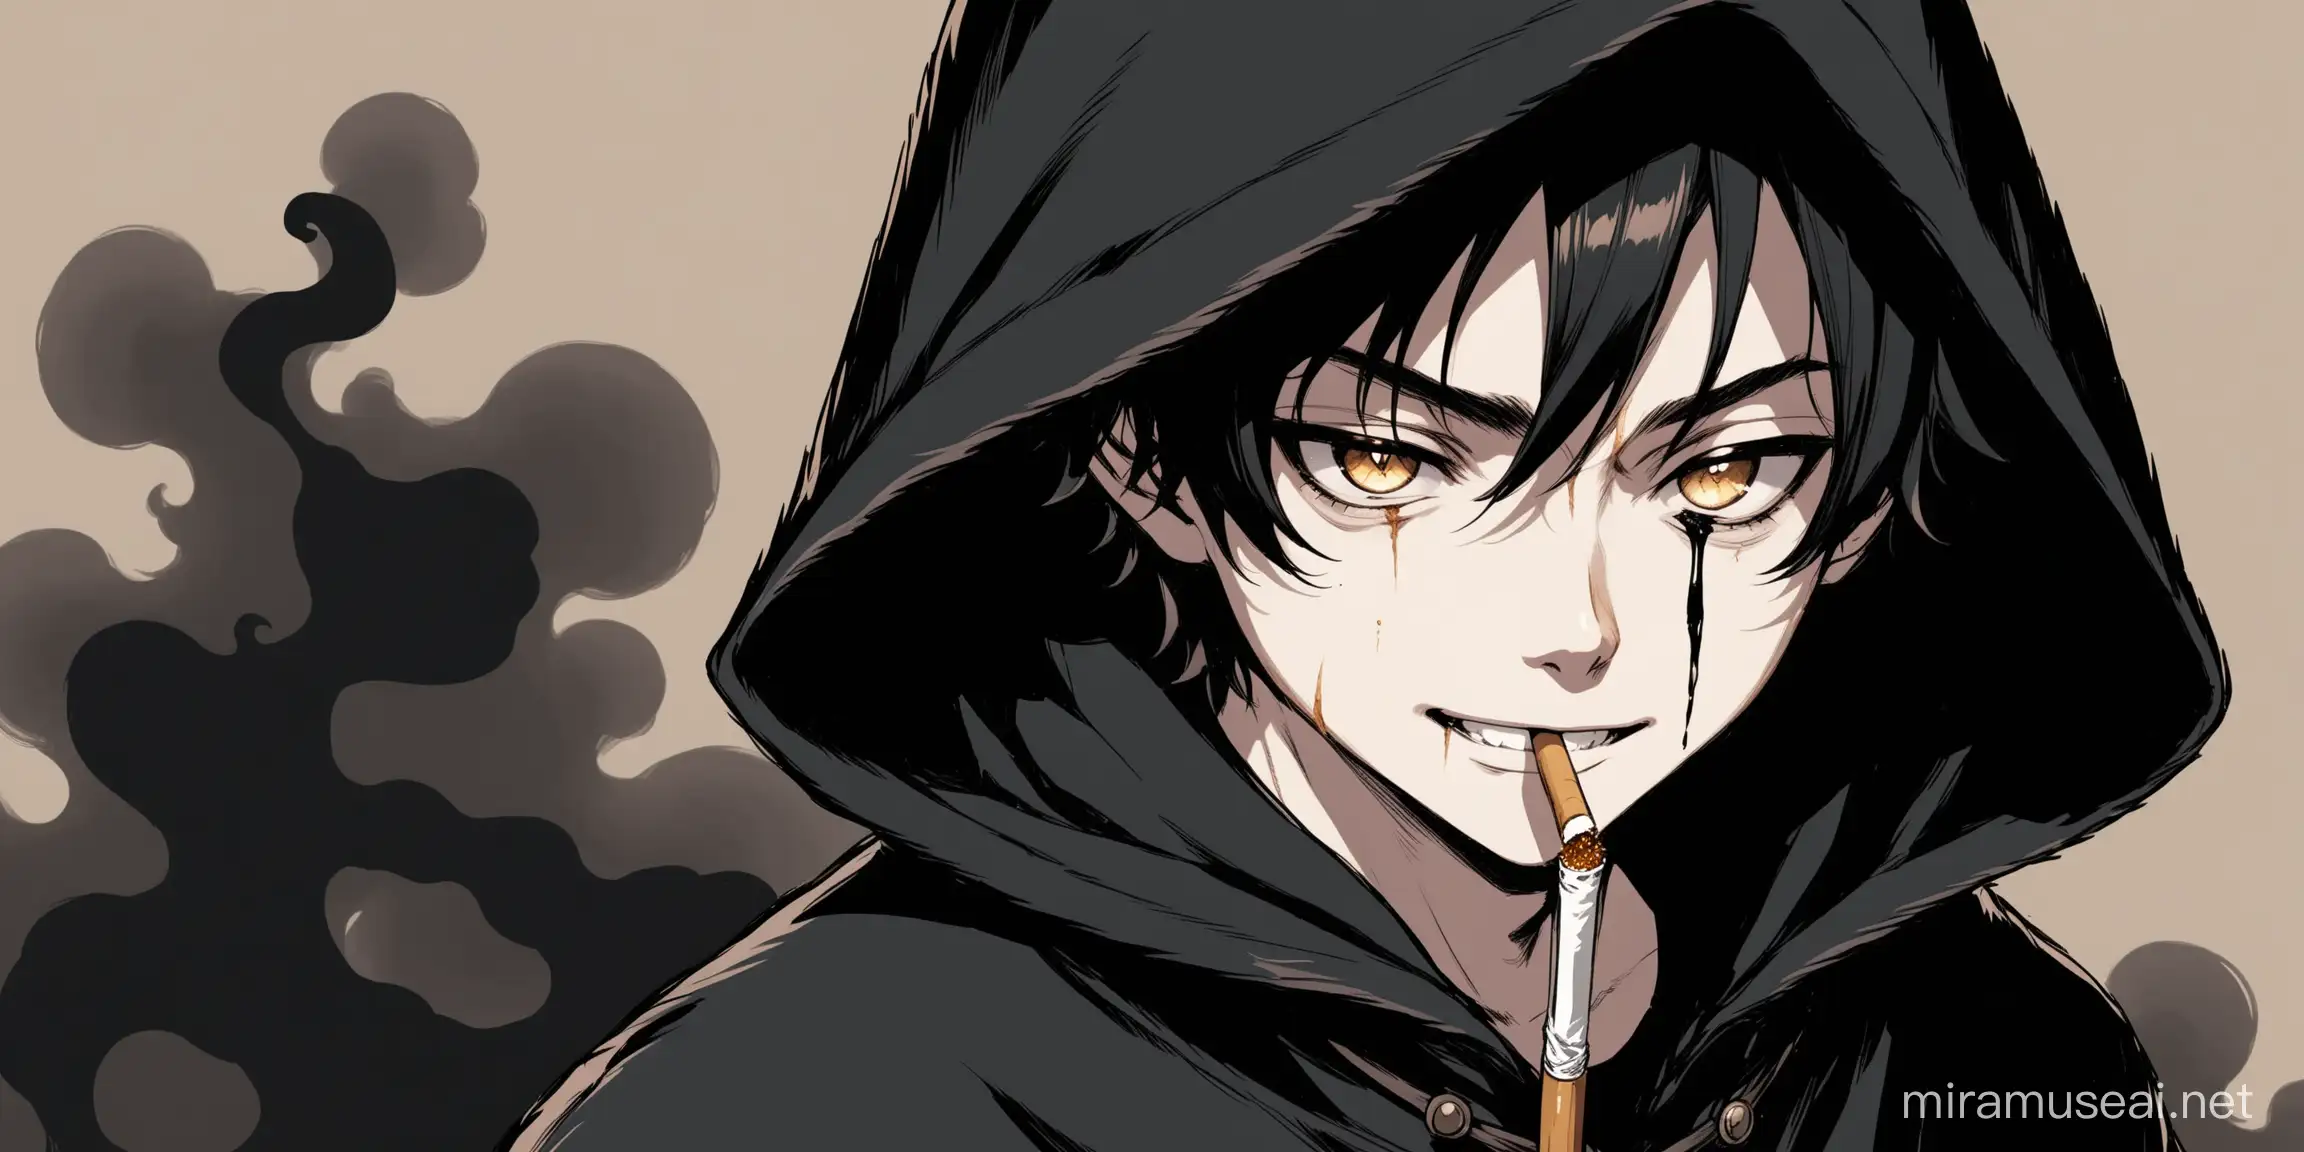 young boy, pale skin and black hair, deep eyes, wears a black cloak similar to a coat with a hood, he has a cigarette in his mouth and a scar in his eye, he has brown eyes of honey, the face has a sarcastic smile, in one hand he has a sword made of black smoke